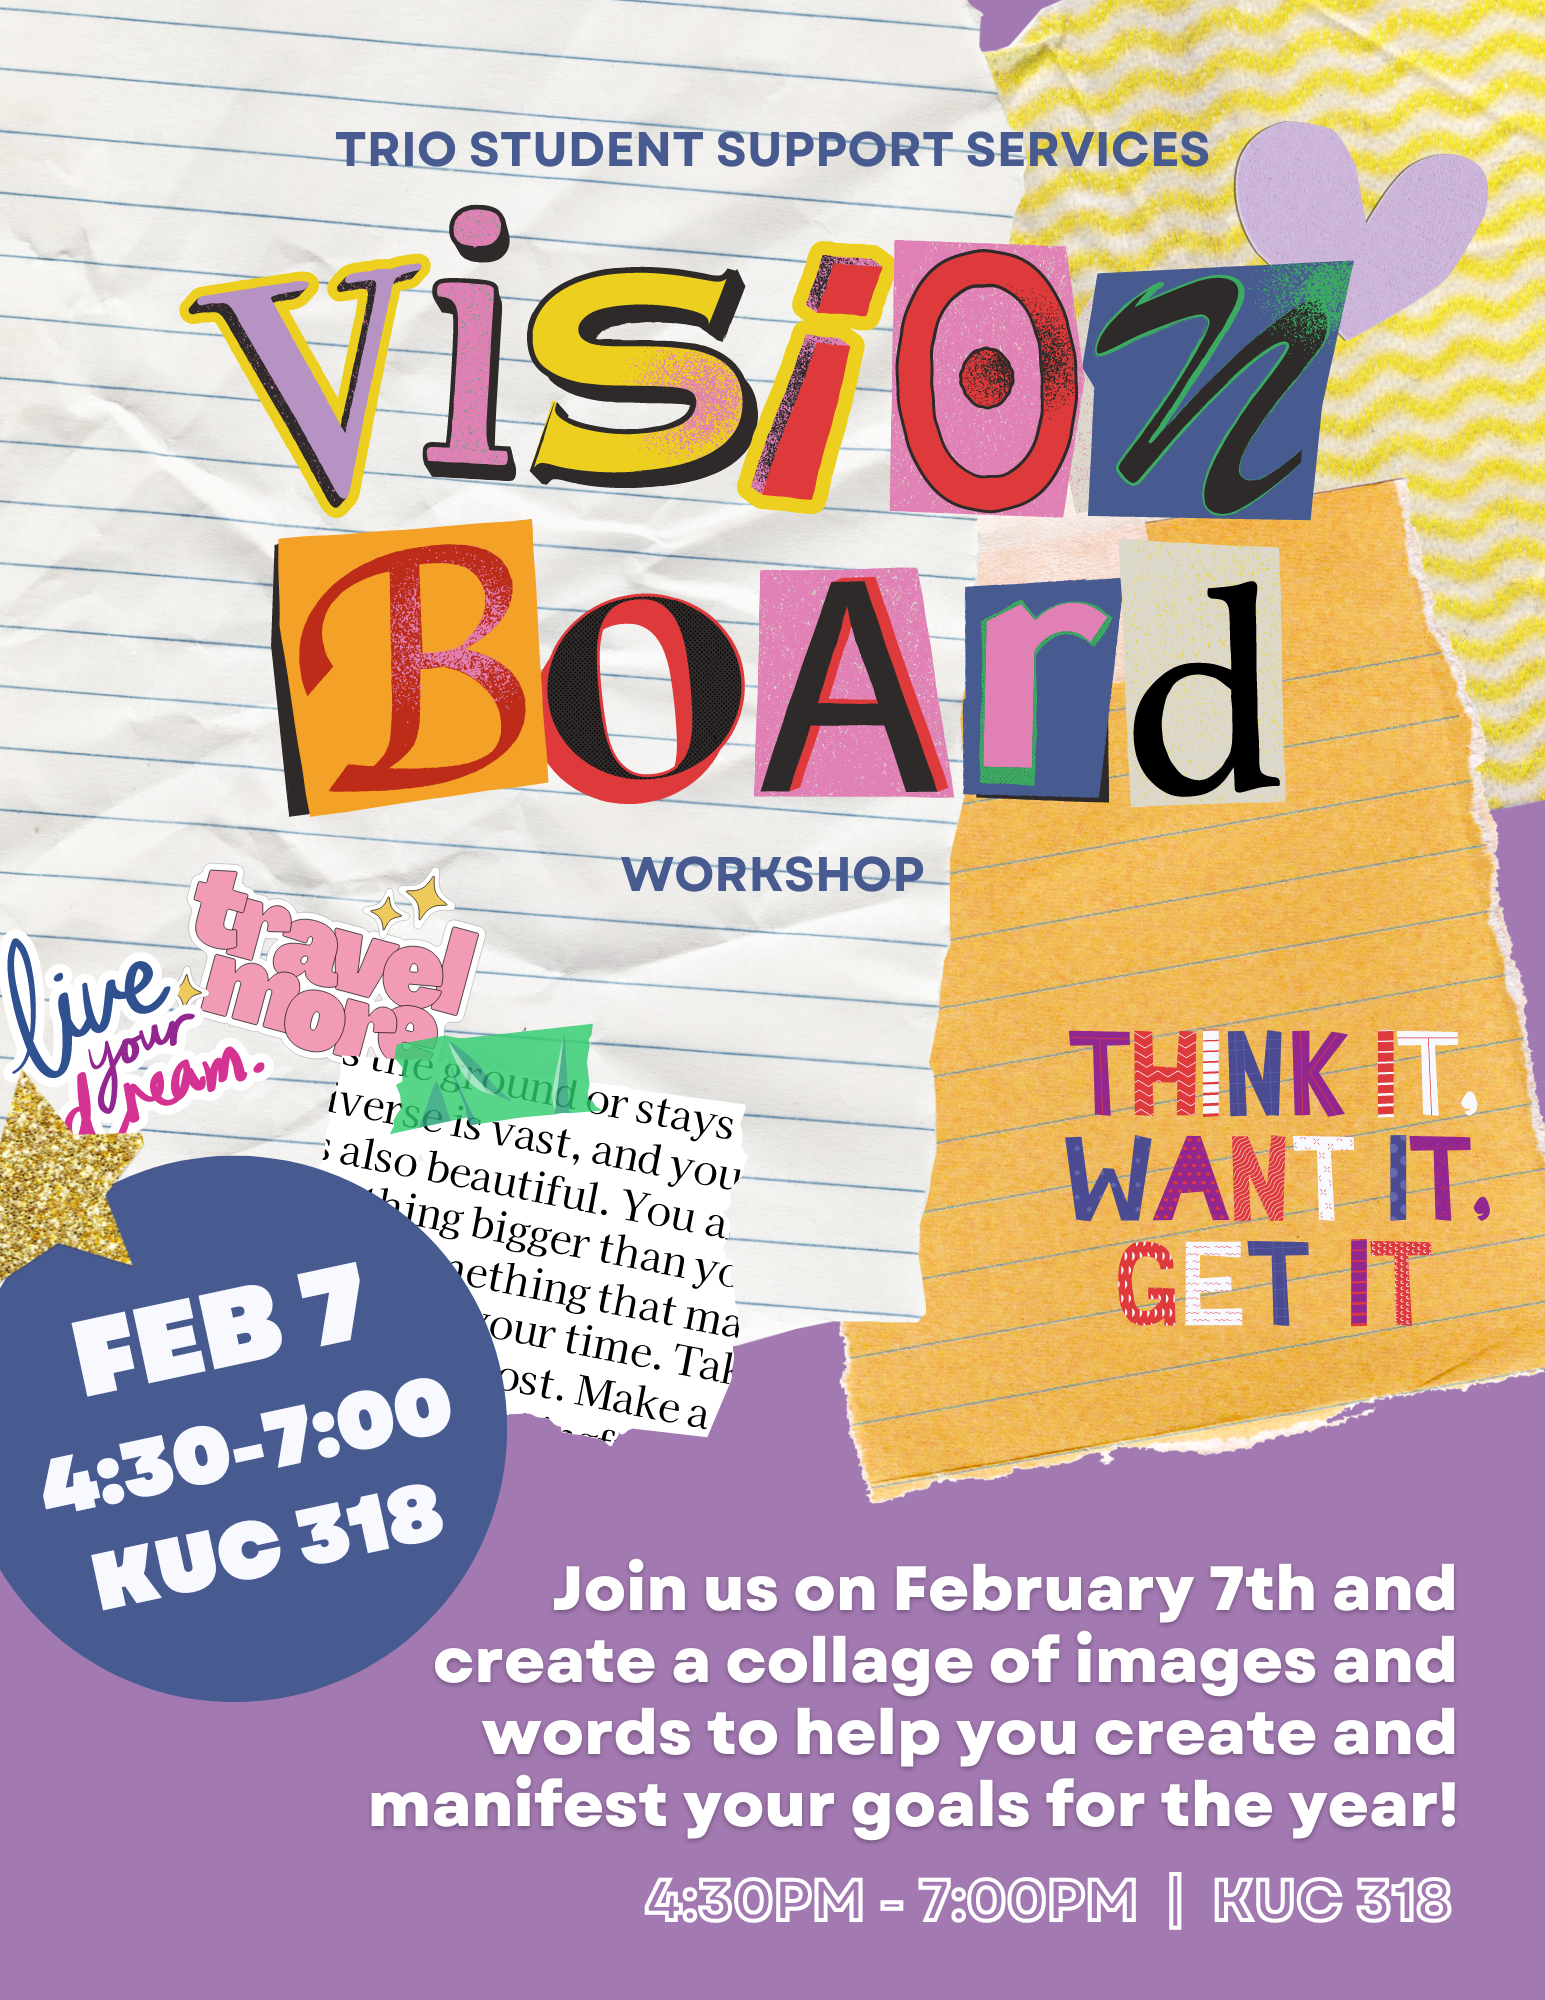 Vision Board Workshop - Feb. 7th at 4:30p in KUC 318